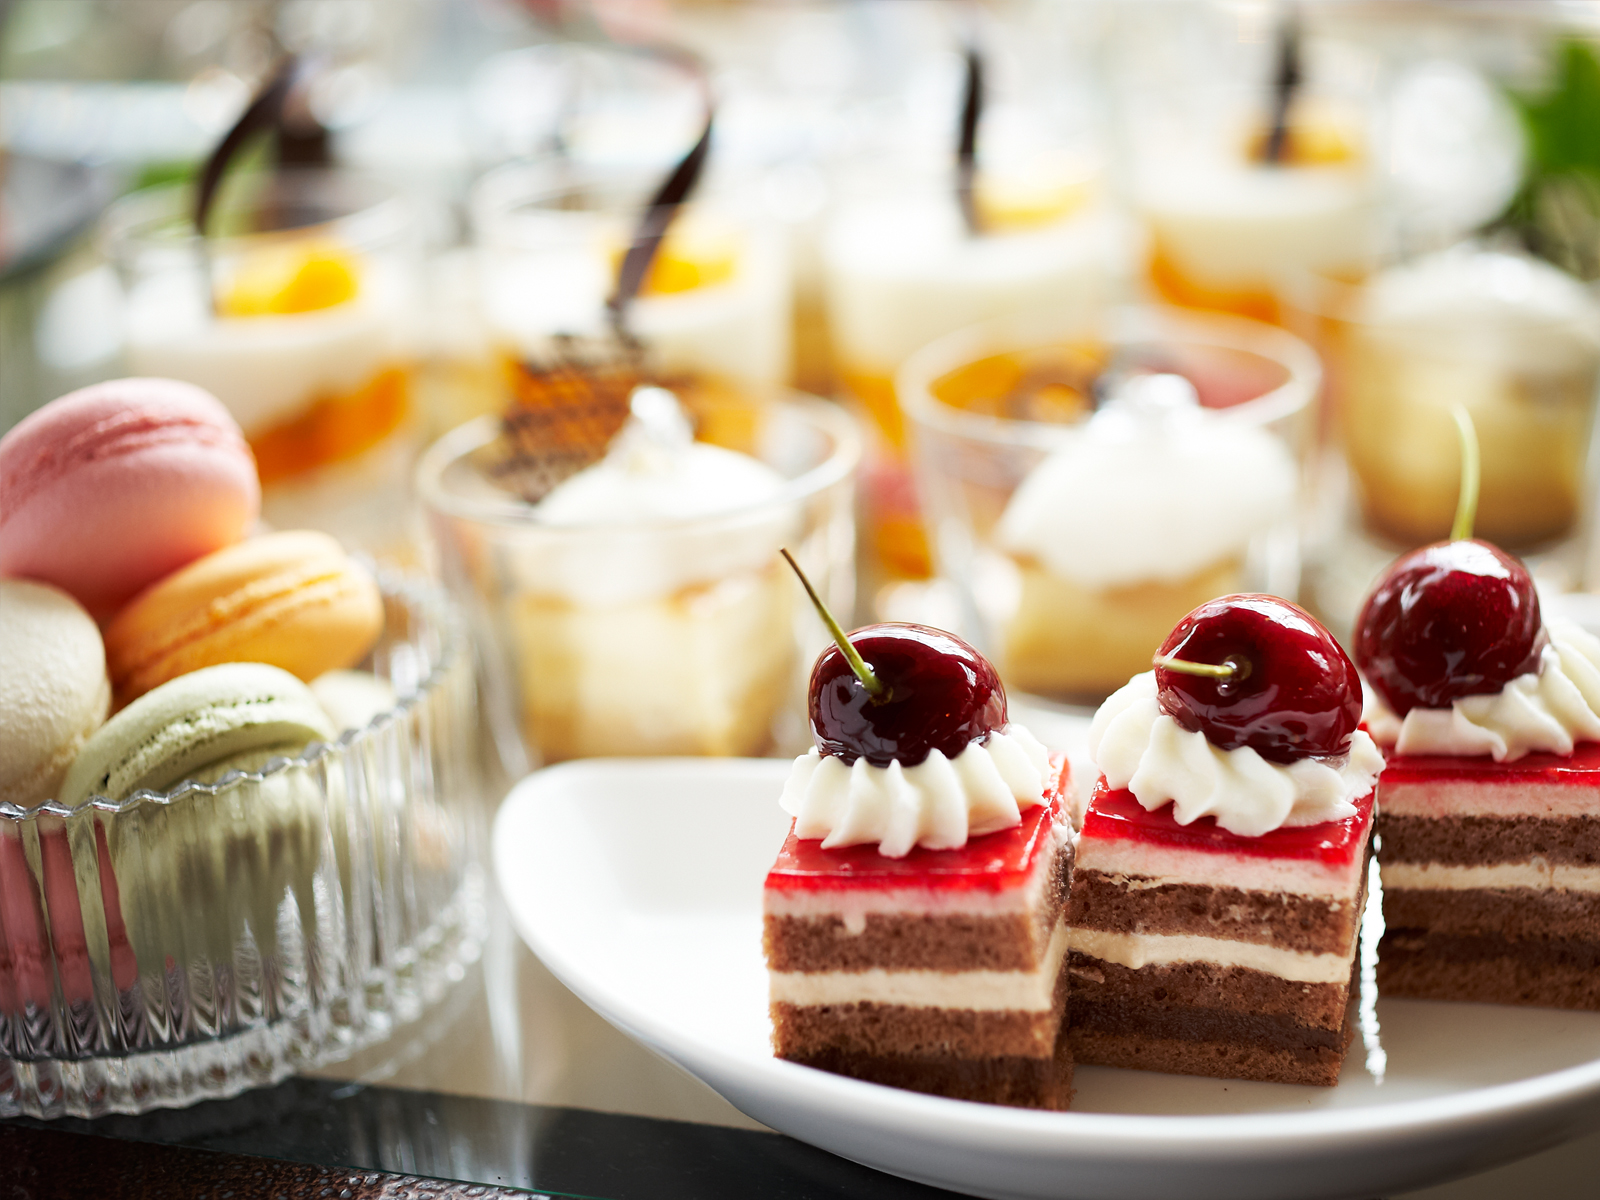 Fill up Your Plate at This Buffet 🍴 and We’ll Let You Know What Age You May Live to dessert buffet